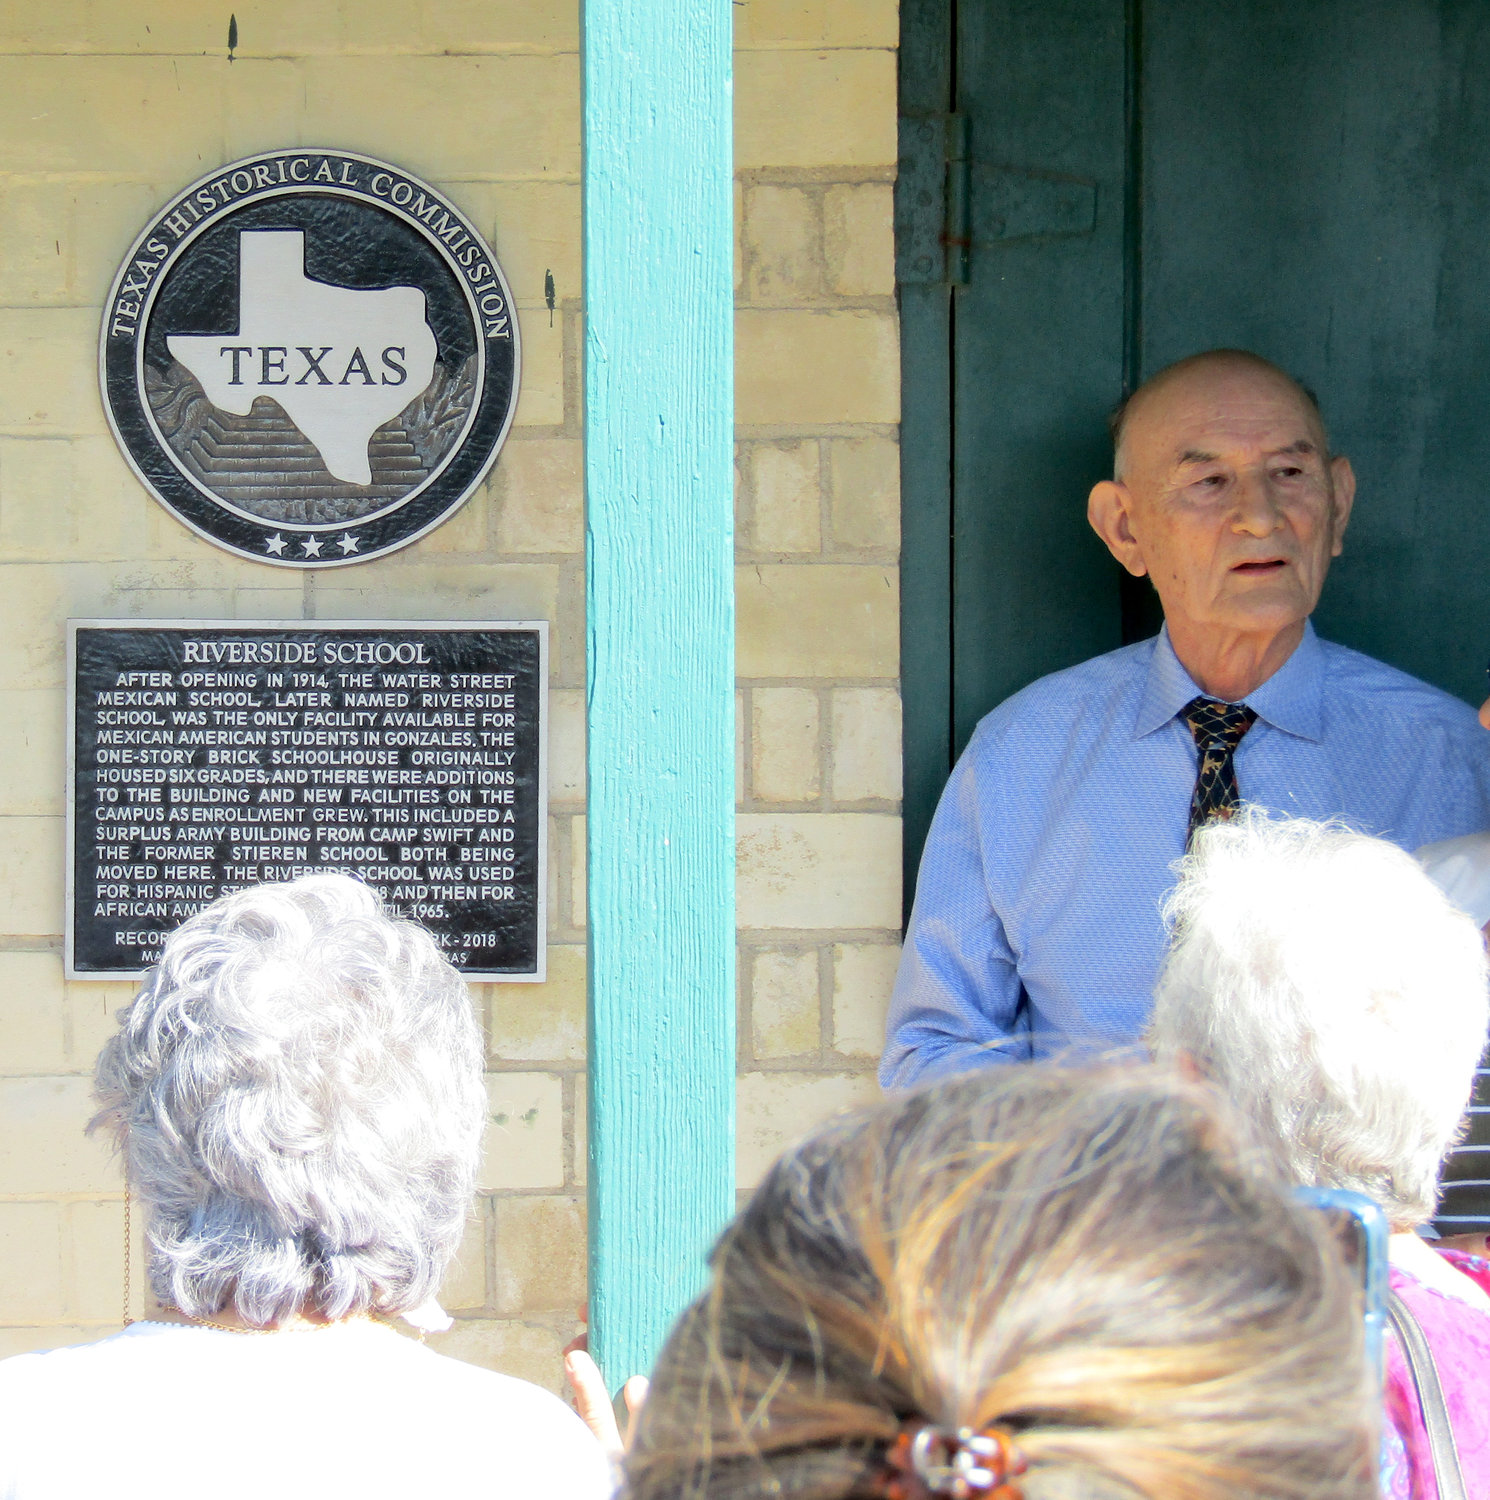 The Texas Historical Commission marker for the Riverside School, also formerly known as the Water Street Mexican School,” was dedicated on Thursday, Sept. 16 at the former school campus turned community center at 110 St. Lawrence St.